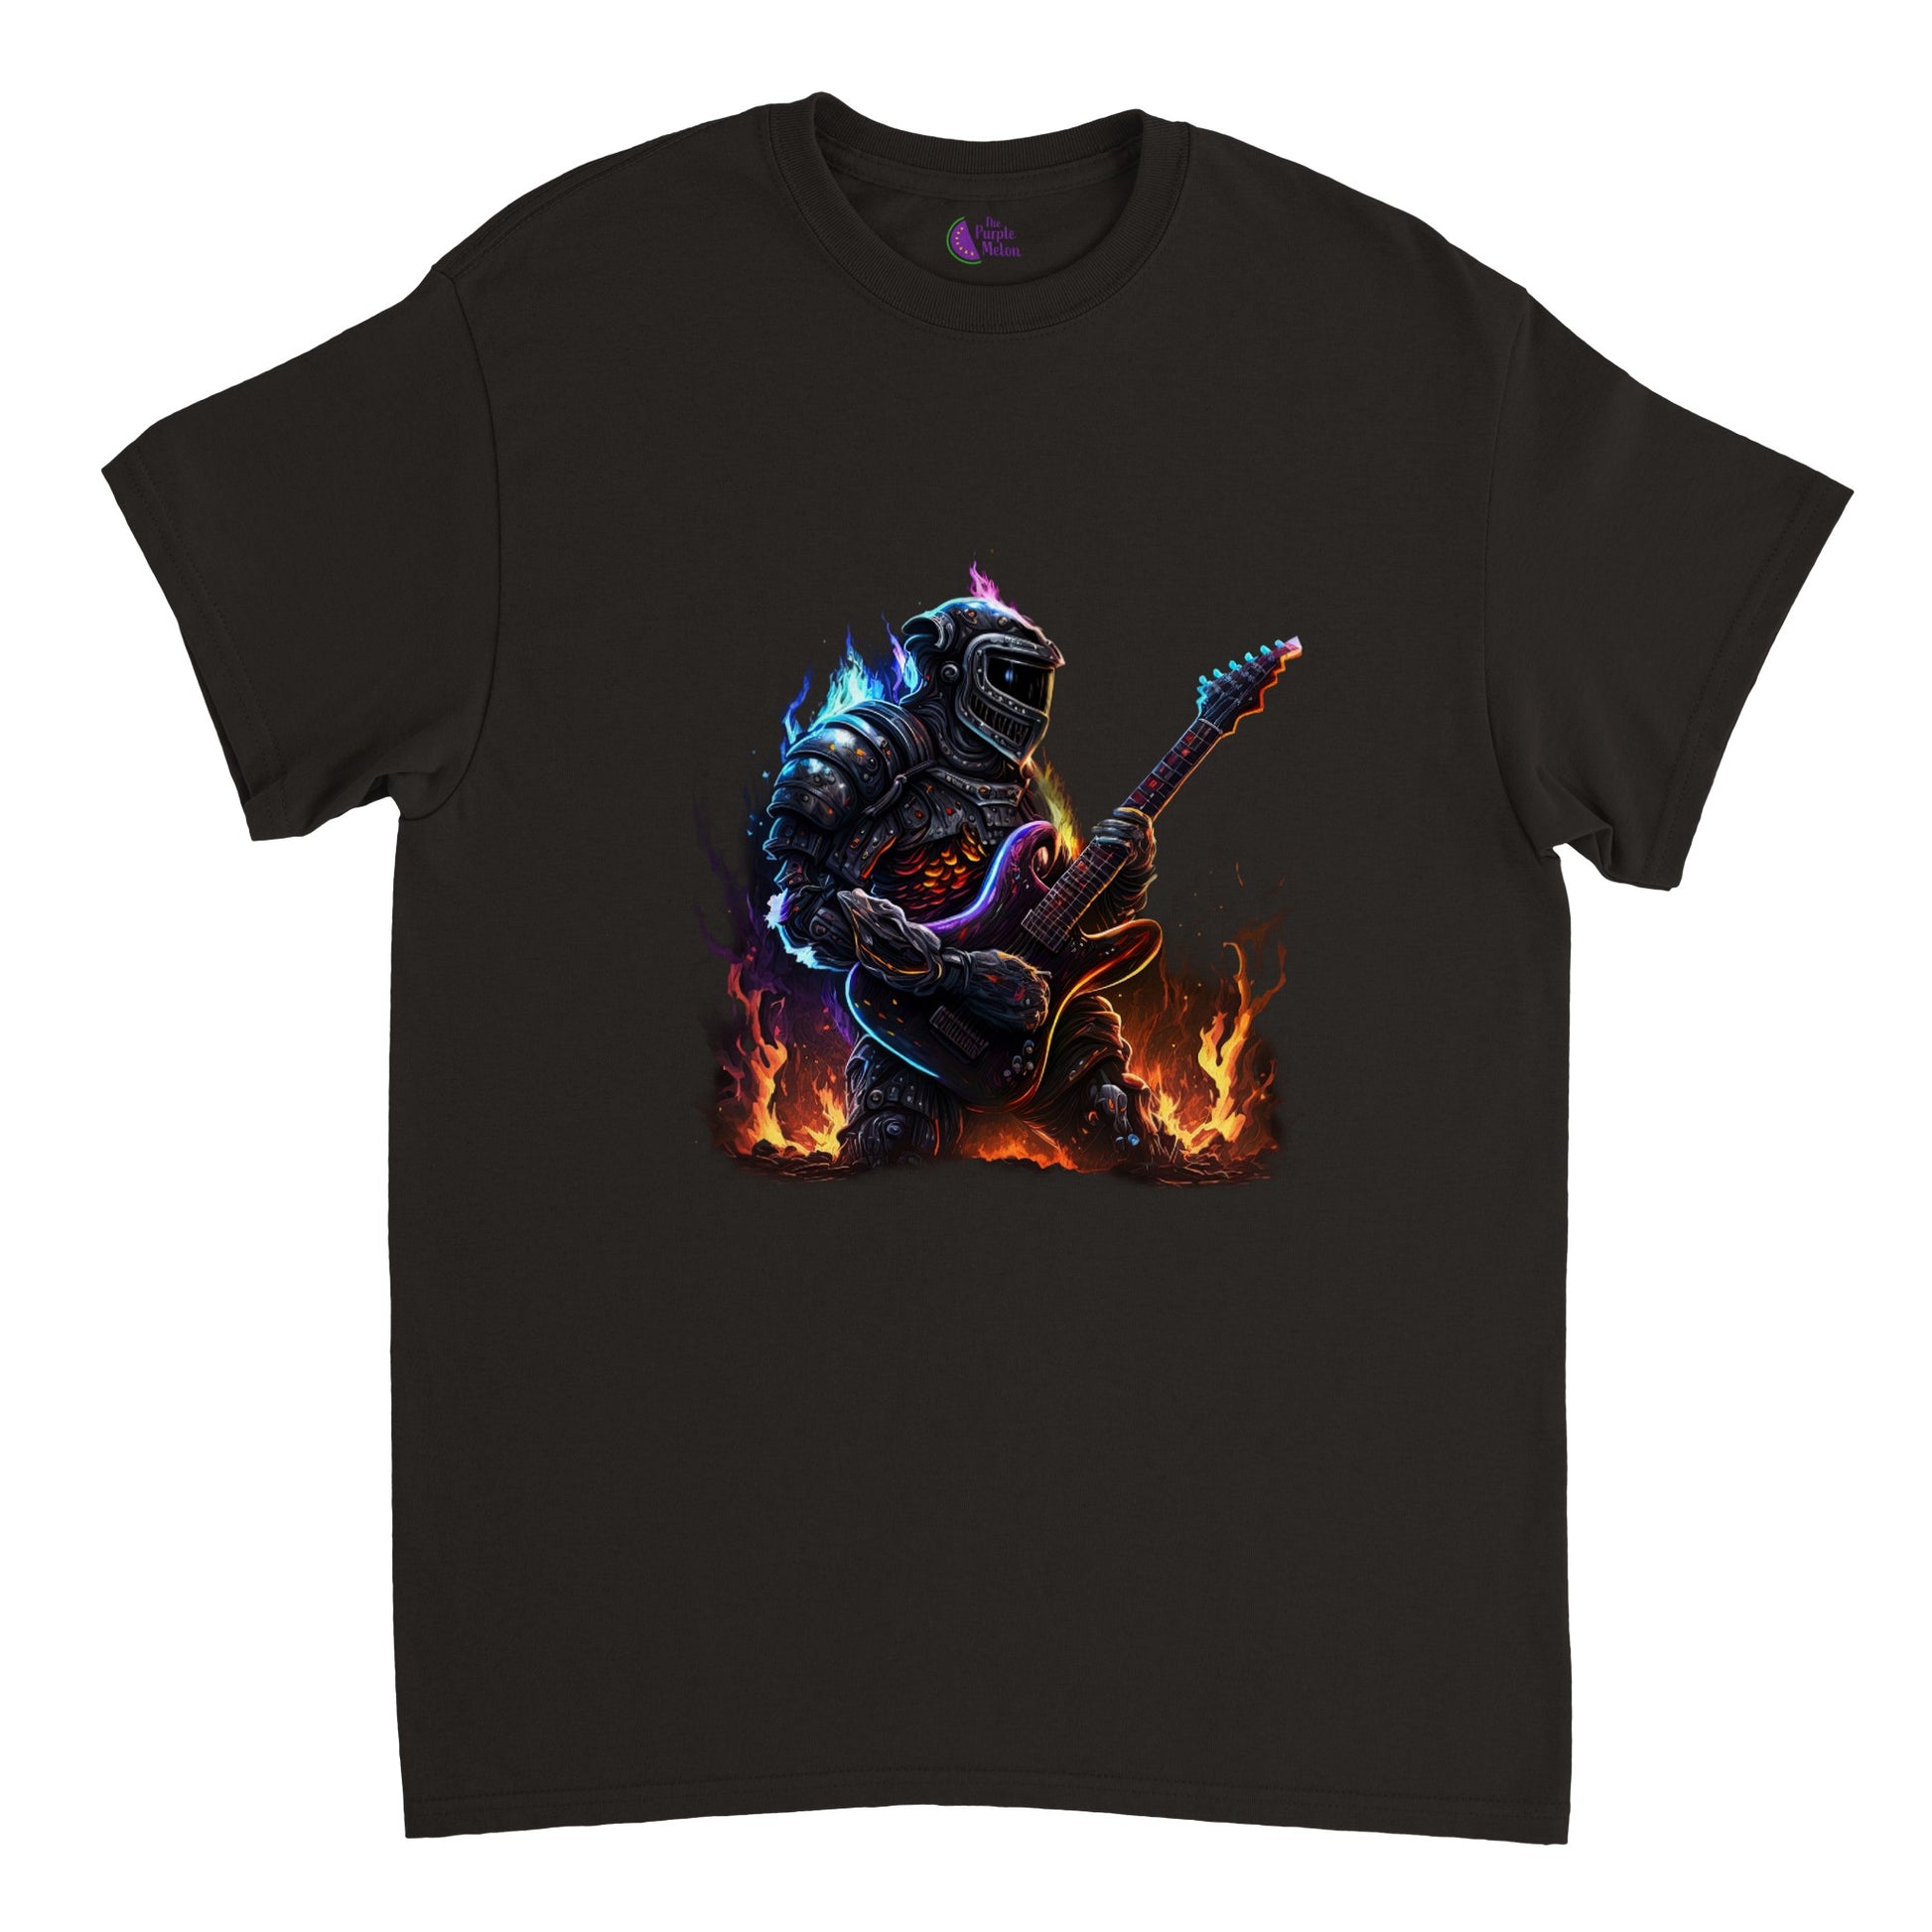 Black t-shirt with Space Robot on fire playing the guitar